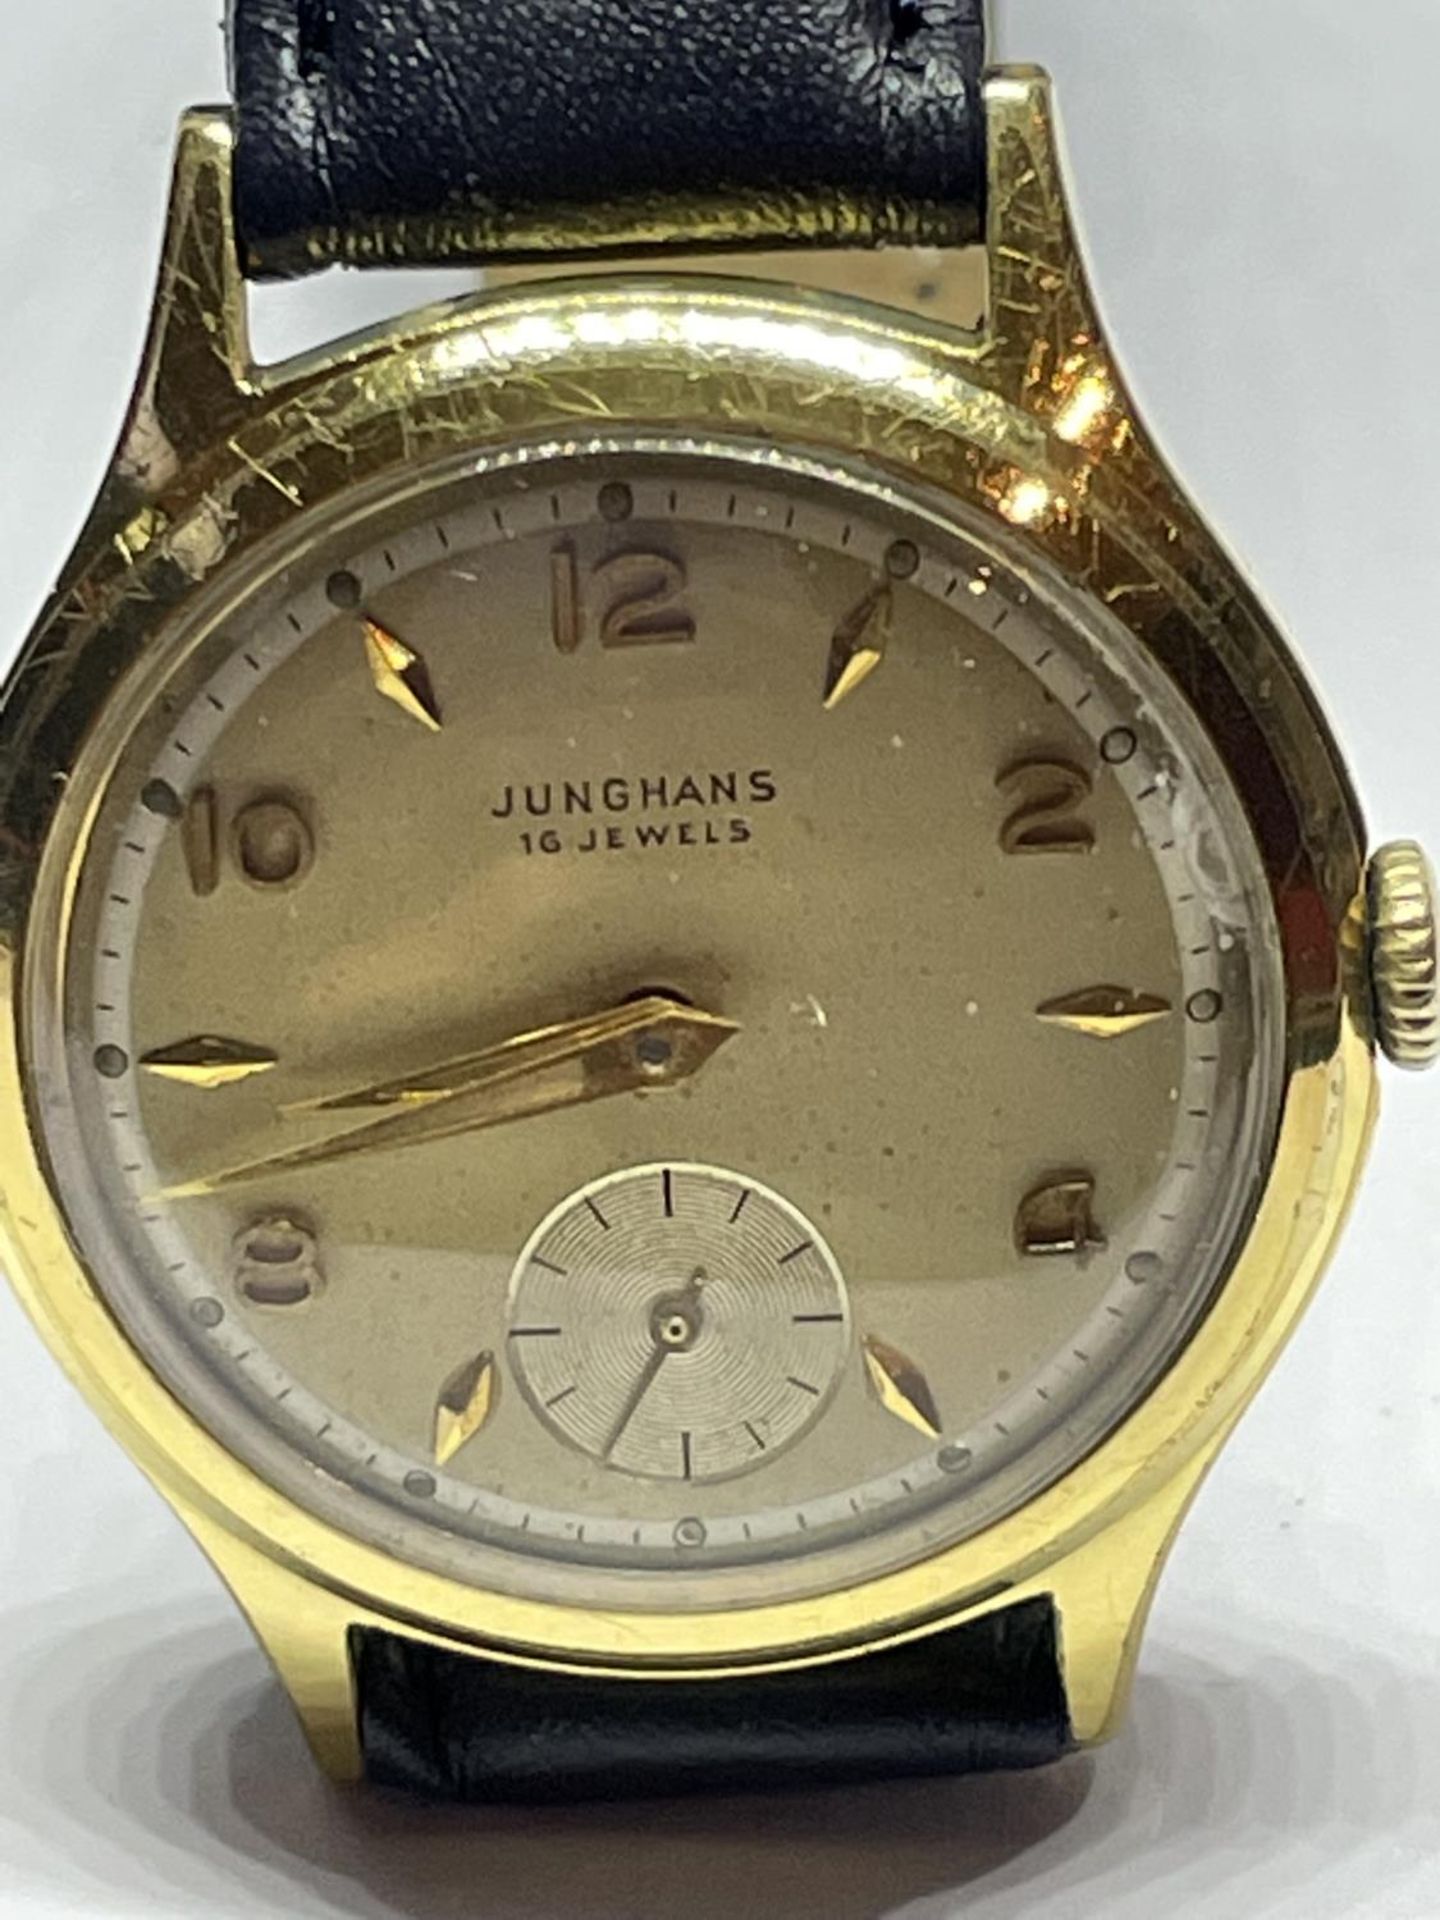 A JUNGHANS WWII WRIST WATCH SEEN WORKING BUT NO WARRANTY IN A PRESENTATION BOX - Image 3 of 4